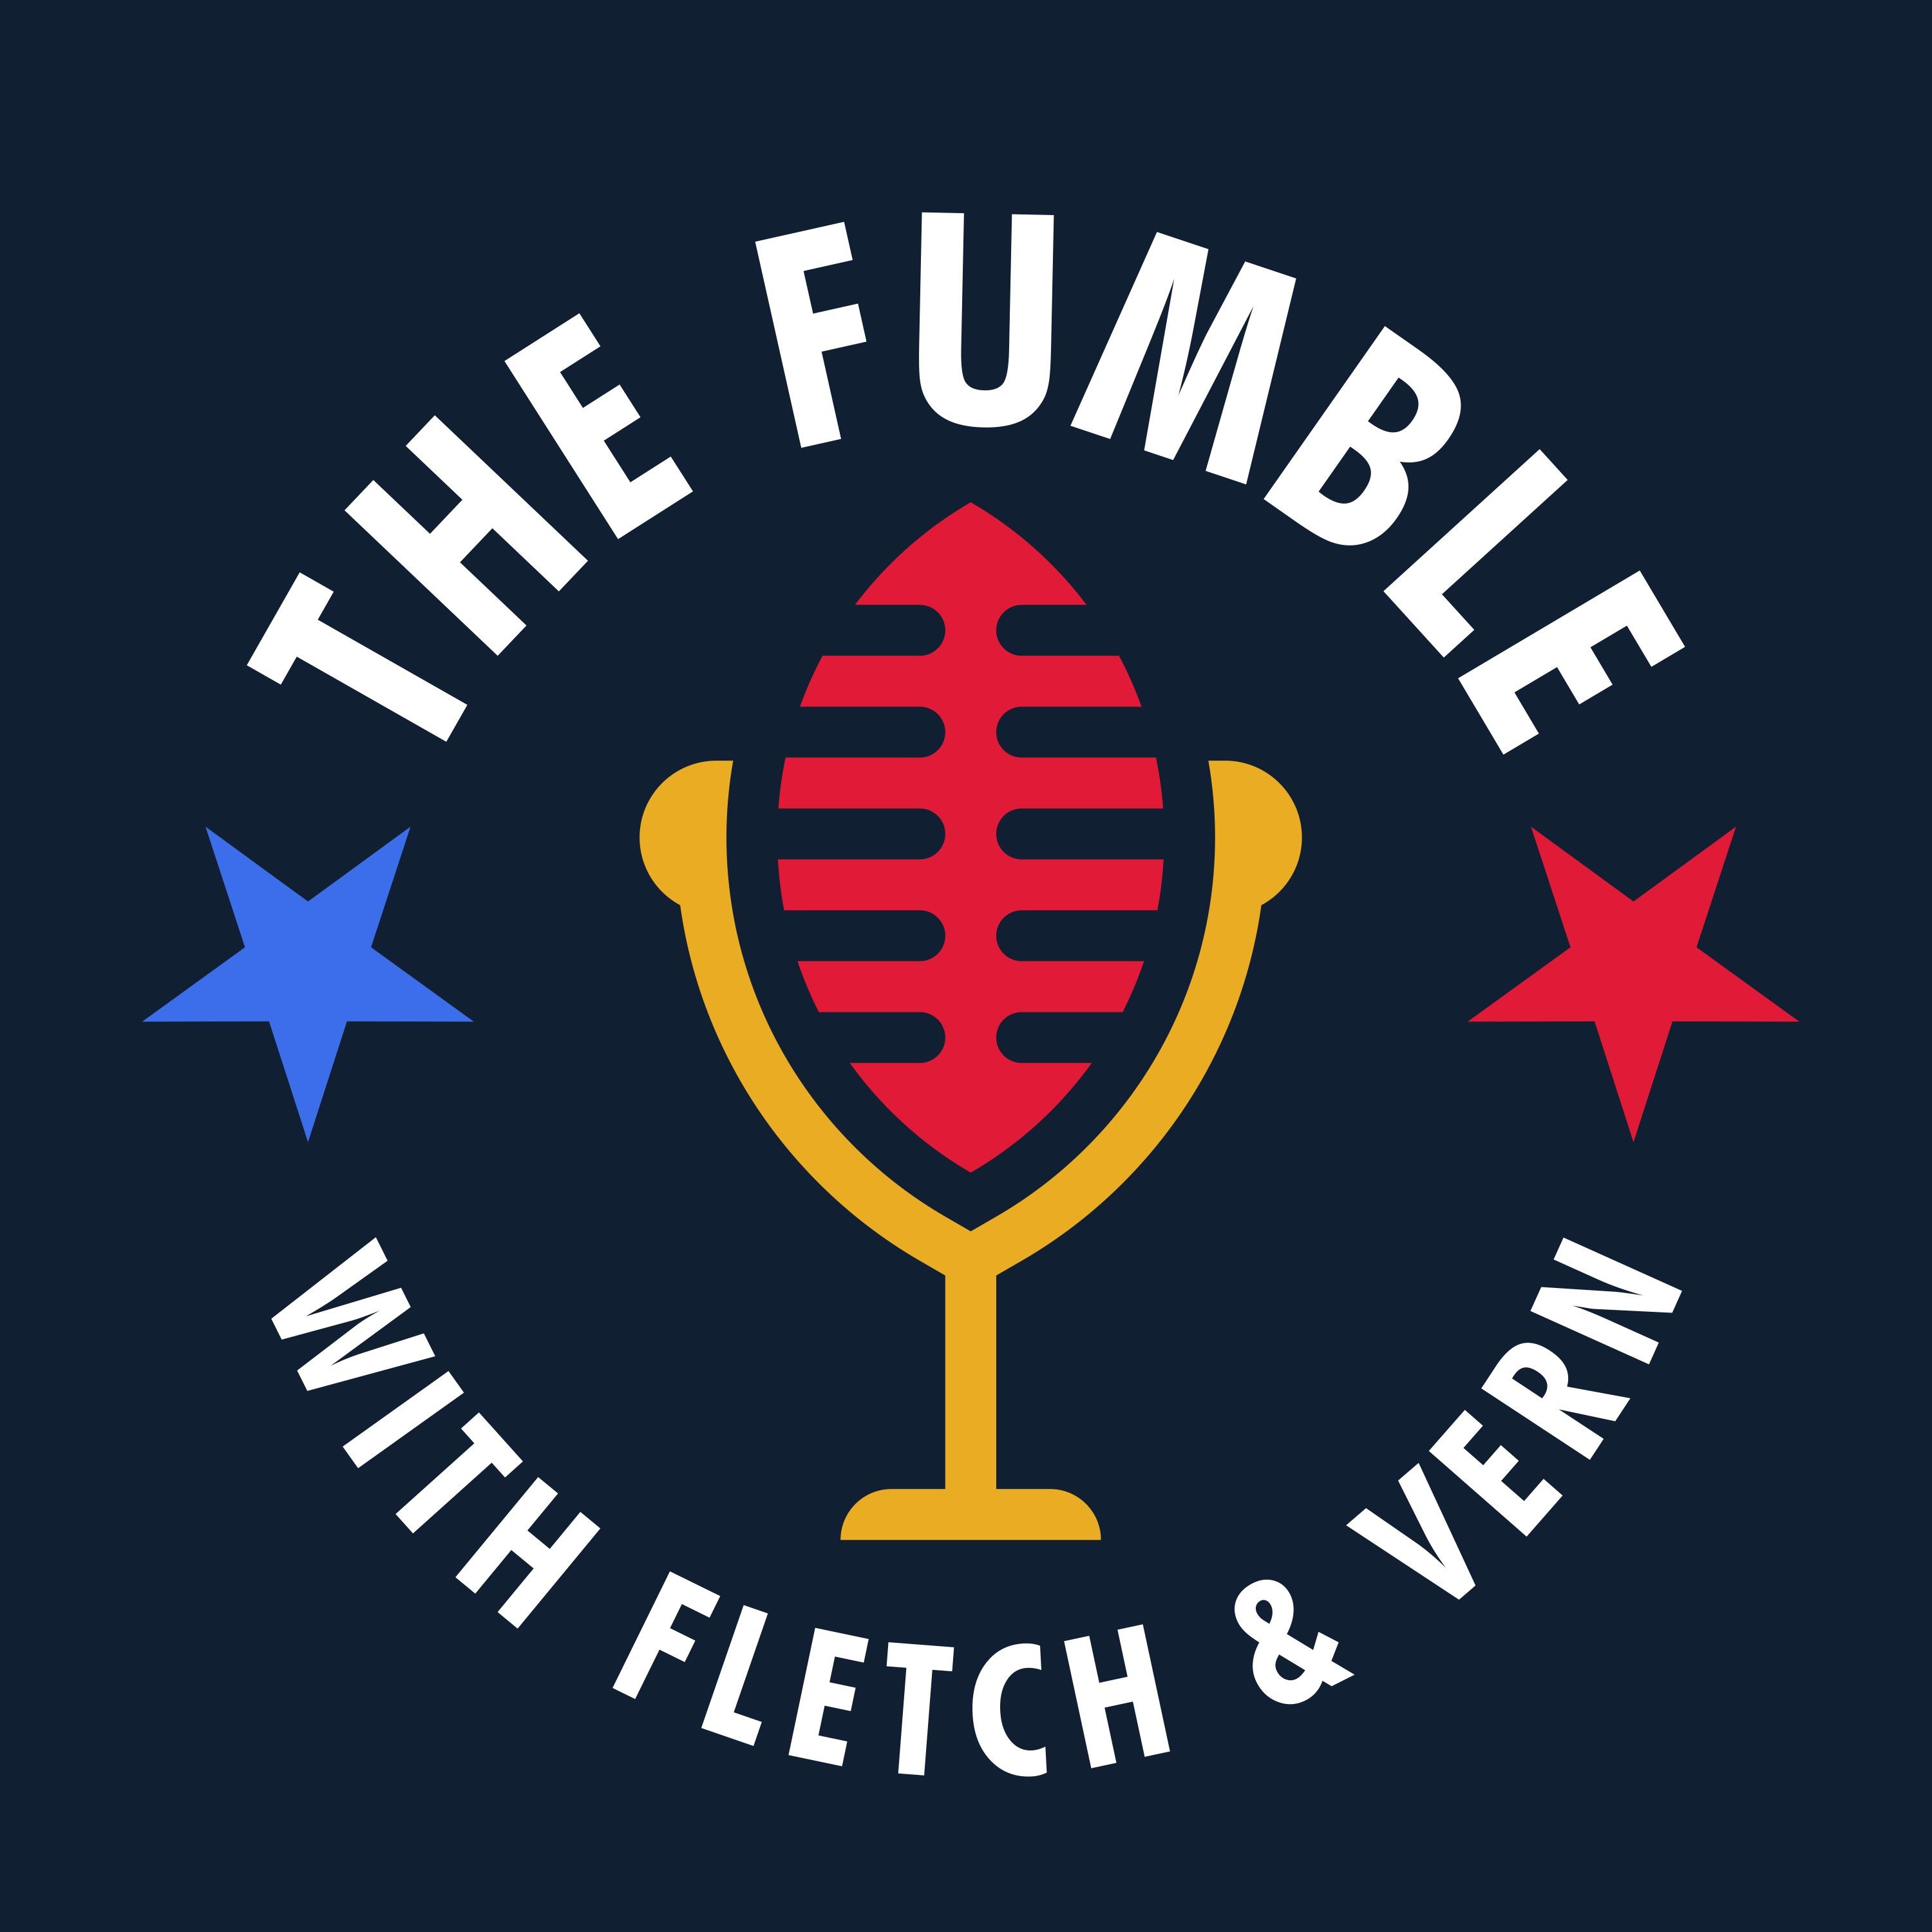 THE FUMBLE with FLETCH & VERN S4E5 NFL WEEK 1 & CHEASEY GARLIC BREAD Matt Sherry Sits In